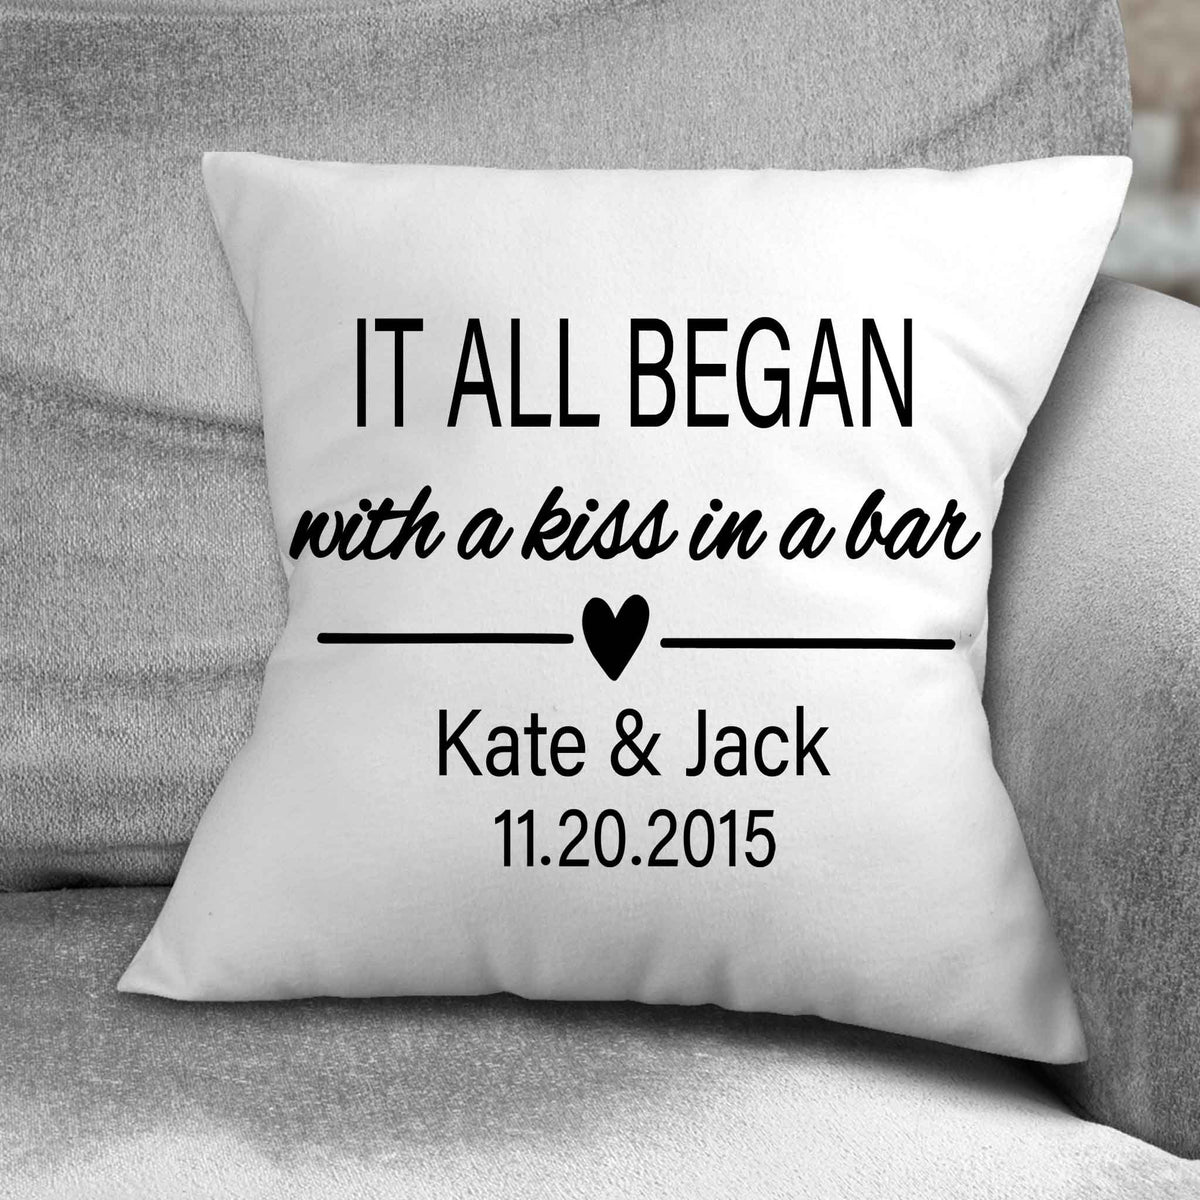 Personalized Throw Pillow | Custom Decorative Pillow | It all began with a kiss